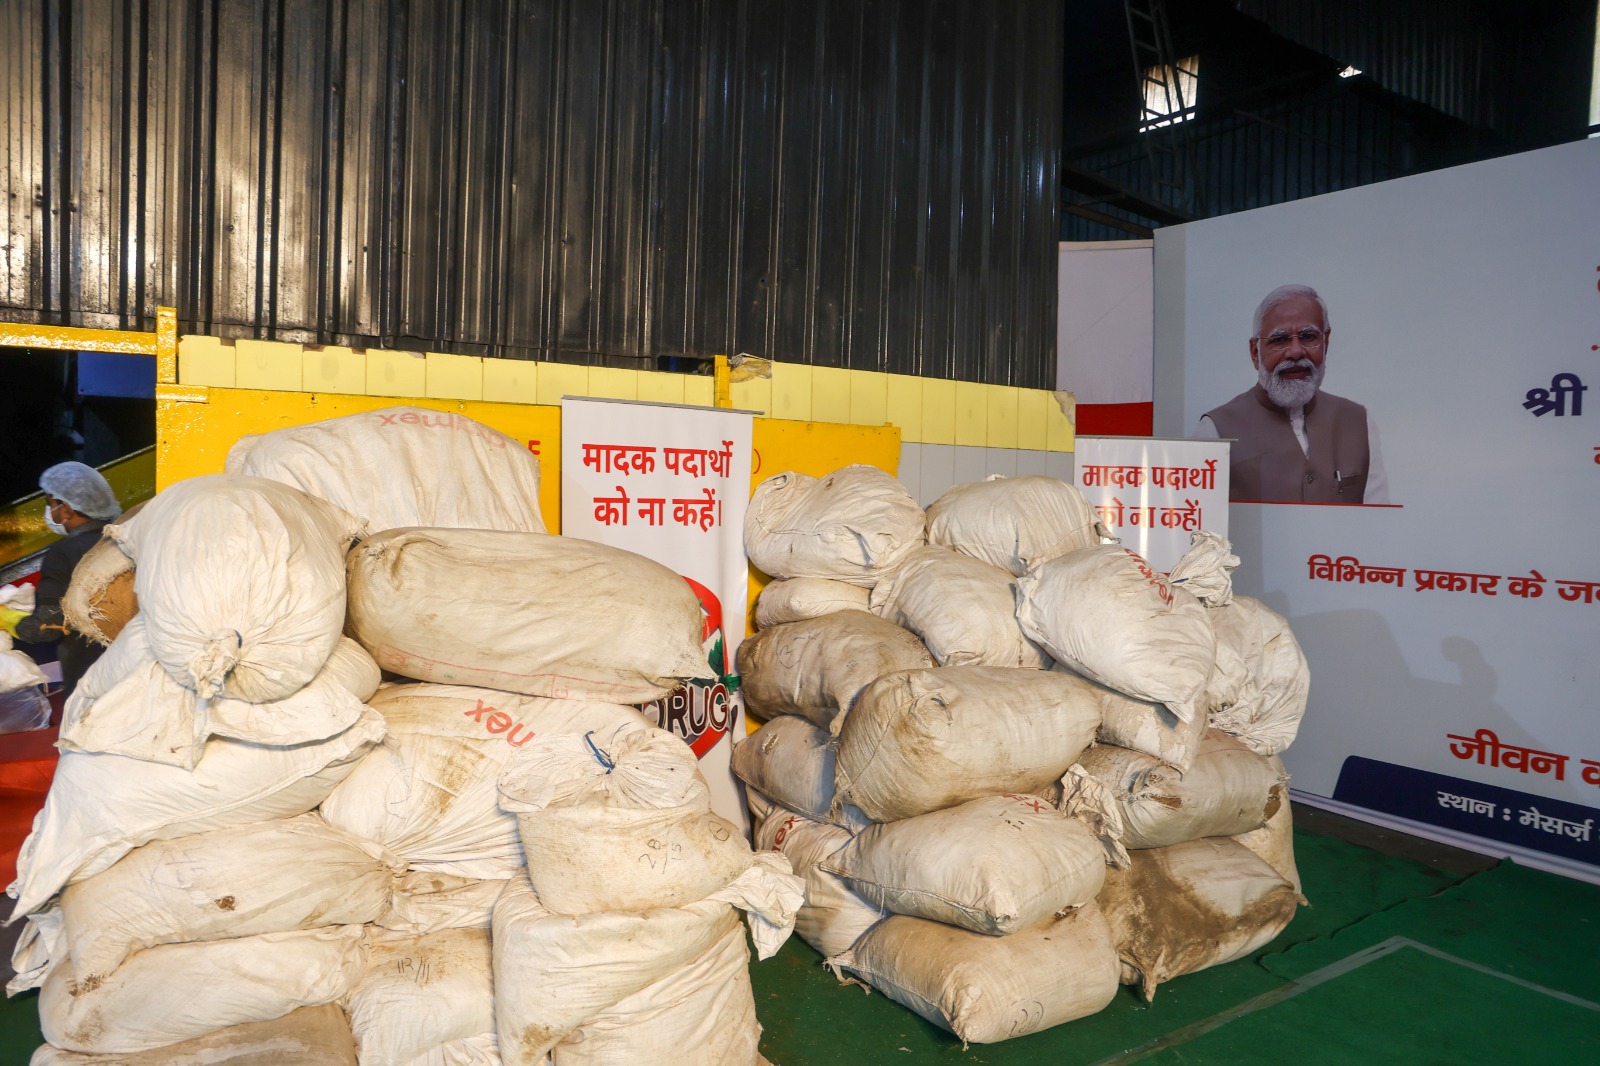 Delhi police destroy more than 10 tonnes of drugs worth INR 1,600 crore   